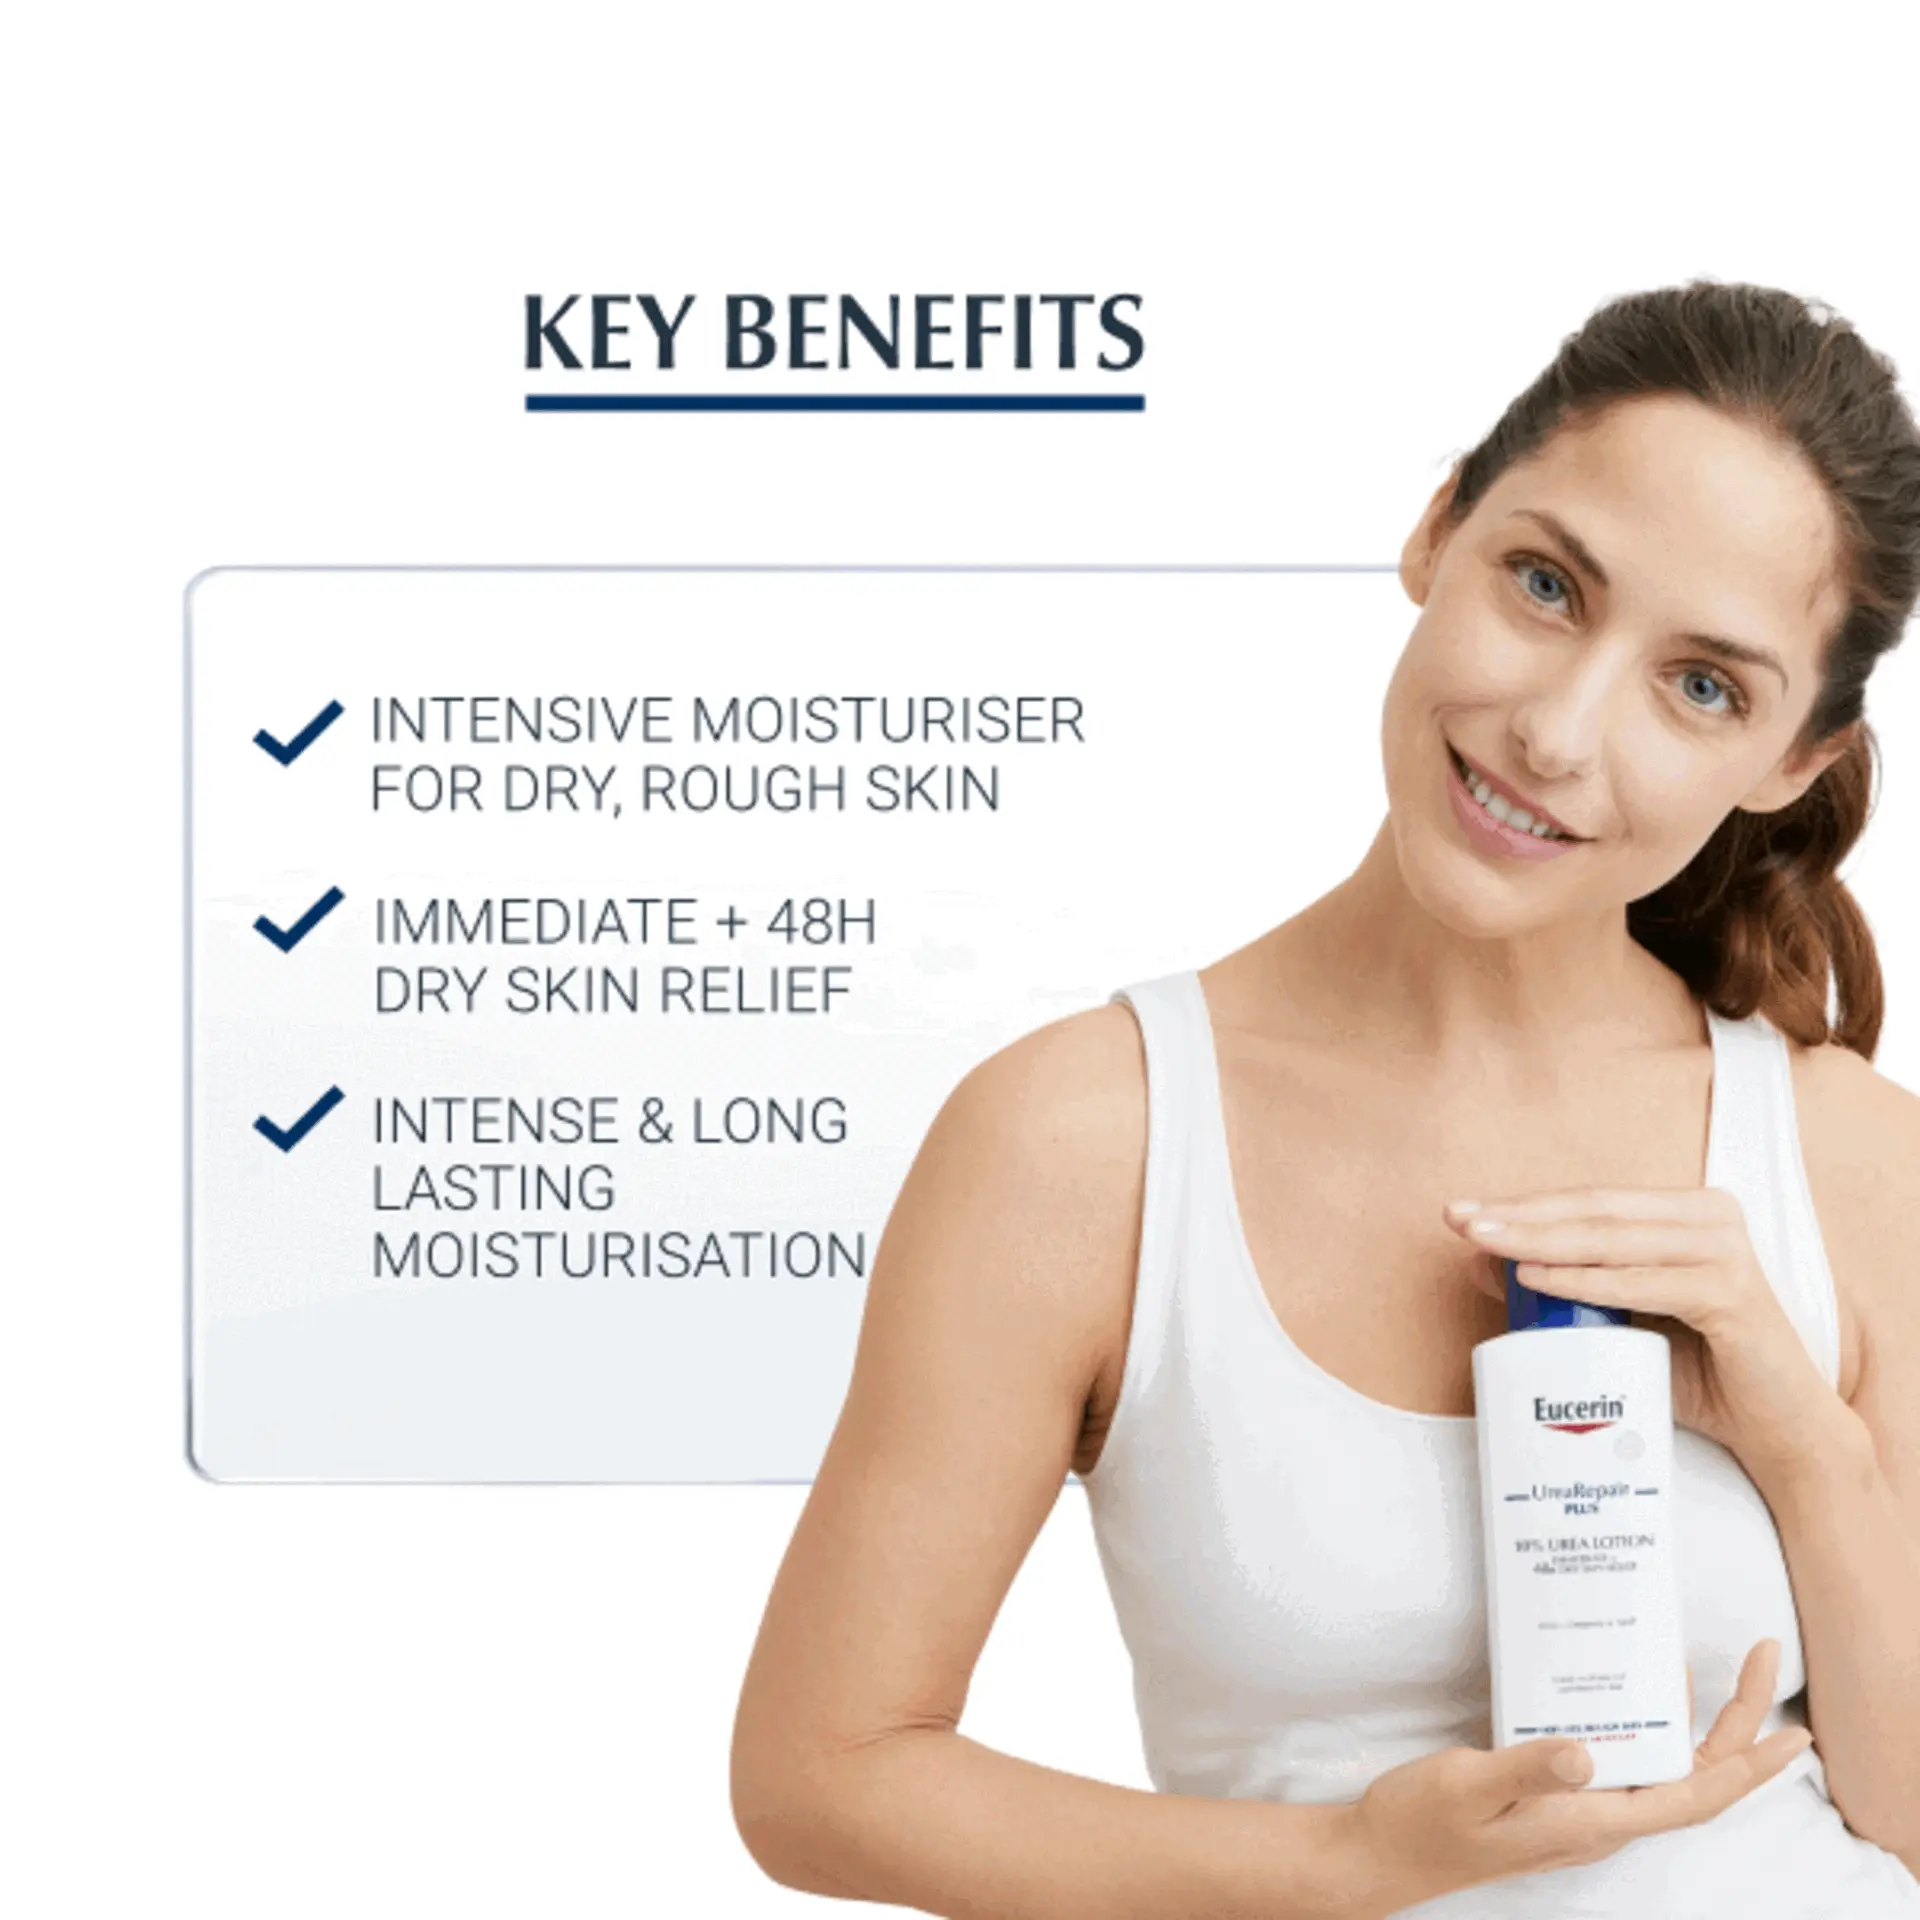 Image 1, KEY BENEFITS INTENSIVE MOISTURISER FOR DRY, ROUGH SKIN IMMEDIATE + 48H DRY SKIN RELIEF INTENSE & LONG LASTING MOISTURISATION Eucerin Urea Repair PLUS 19% UREA LOTION Image 2, Eucerin -UreaRepair- PLUS 10% UREA LOTION IMIN DIAS 484 DRY SKIN RELI U+C&AM G DRY/VERY DRY SKIN 1RY DIY BOUGH ANA MIRICAL HOW INTENSE HYDRATION FOR BODY Image 3, CLINICALLY PROVEN RESULTS* 92% MORE MOISTURE *WEBER TM ET AL. TREATMENT OF XEROSIS WITH A TOPICAL FORMULATION CONTAINING GLYCERYL GLUCOSIDE, NATURAL MOISTURIZING FACTORS, AND CERAMIDE. J CLIN AESTH DERMATOL, 2012; 5 (8(: 29-39). Image 4, KEY INGREDIENTS UREA Improves skin hydration & makes the skin smoother CERAMIDES NATURAL MOISTURISING FACTORS(NMF) Binds moisture to the skin, preventing it from drying out Strengthen the skin's barrier & prevent moisture loss Image 5, DISCOVER MORE WASH FLUID HAND CREAM FOOT CREAM Eucerin -UreaRepair PLUS 5% UREA BODY WASH CENTLY CLEANSES VERY DRY SKIN GEL DE BAÑO 5% UREA LIMPIA SLAVEY EFICAZMENTE LA FILL MUY SICA Eucerin UreaRepair PLUS 5% UREA HAND CREAM IMMEDIATE+434DITY SON RELIEF Eucerin UreaRepair. PLUS 10% UREA FOOT CREAM SAMEDIATE-45 OY SION ROUT CREMA DE PIES 10% LIREA BHC TO DOVEDIID + ALAVELA FEL CA Les Cong c and being lady Ucun Mobarising factors U+Ceramide & Nig Long bang the DRY, ROUGH HANDS PEL MUY SOCAT ASPERA CURENSO SI O LA PILL